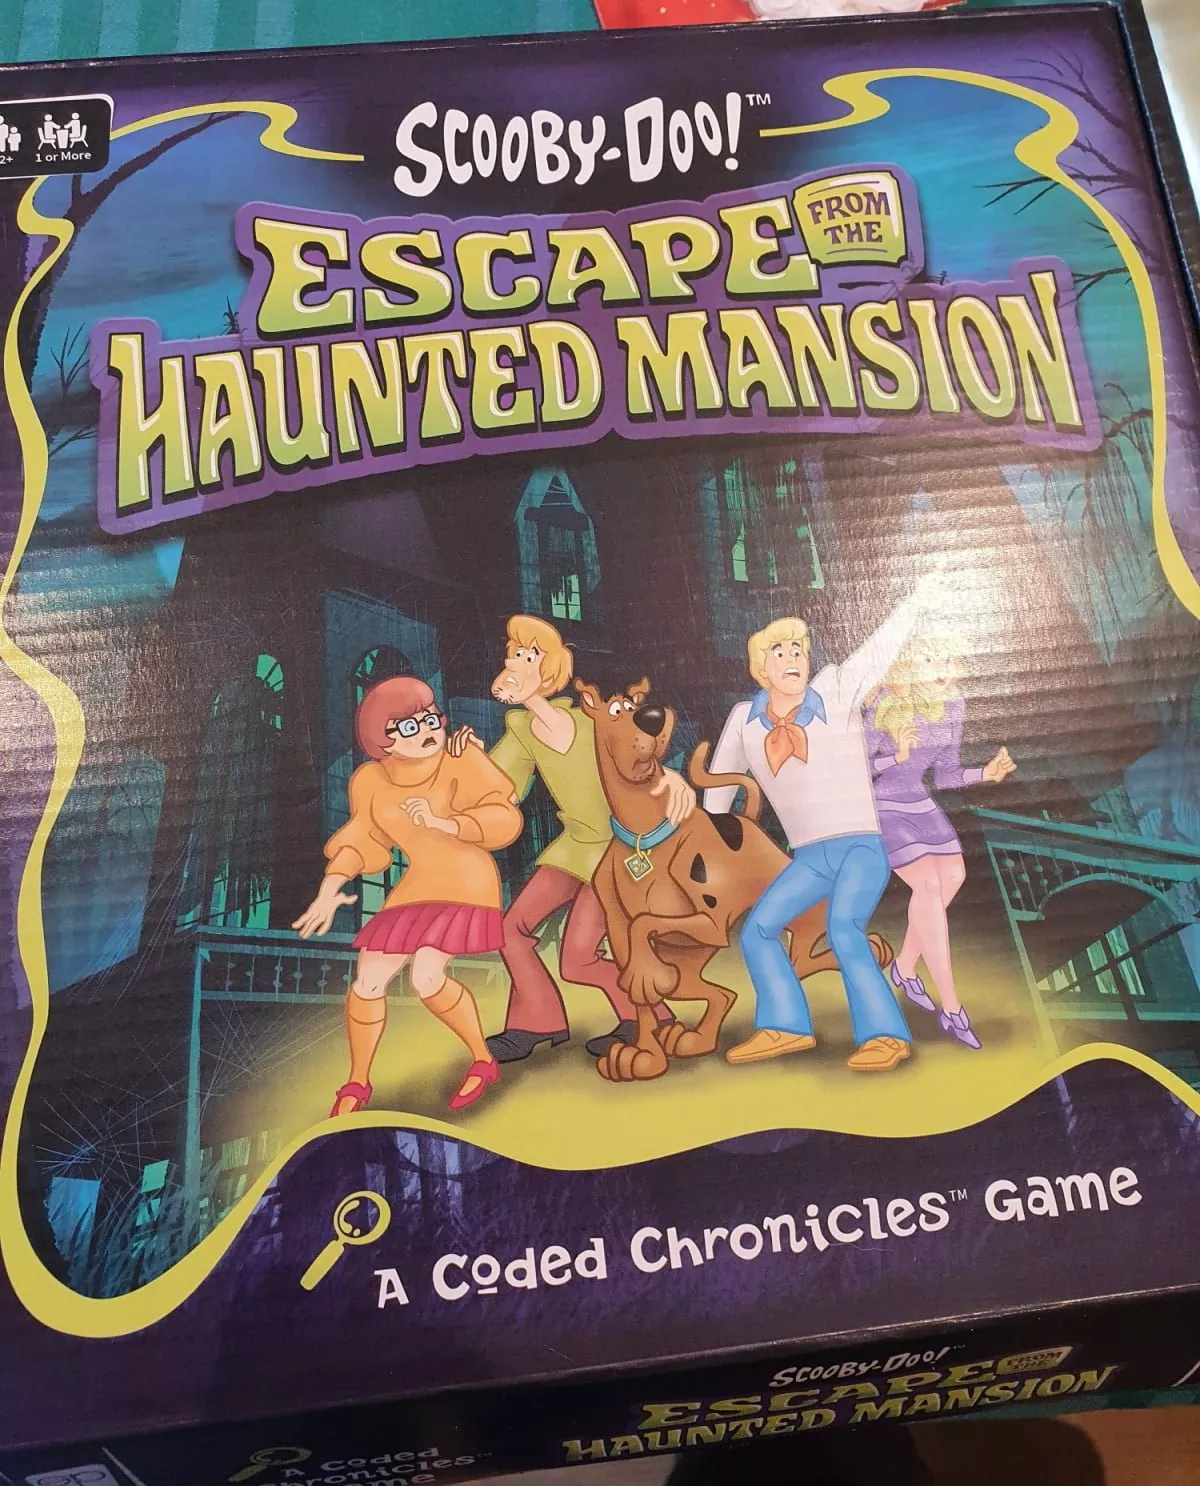 Escape room board Game: Scooby Doo Escape from the Haunted Mansion